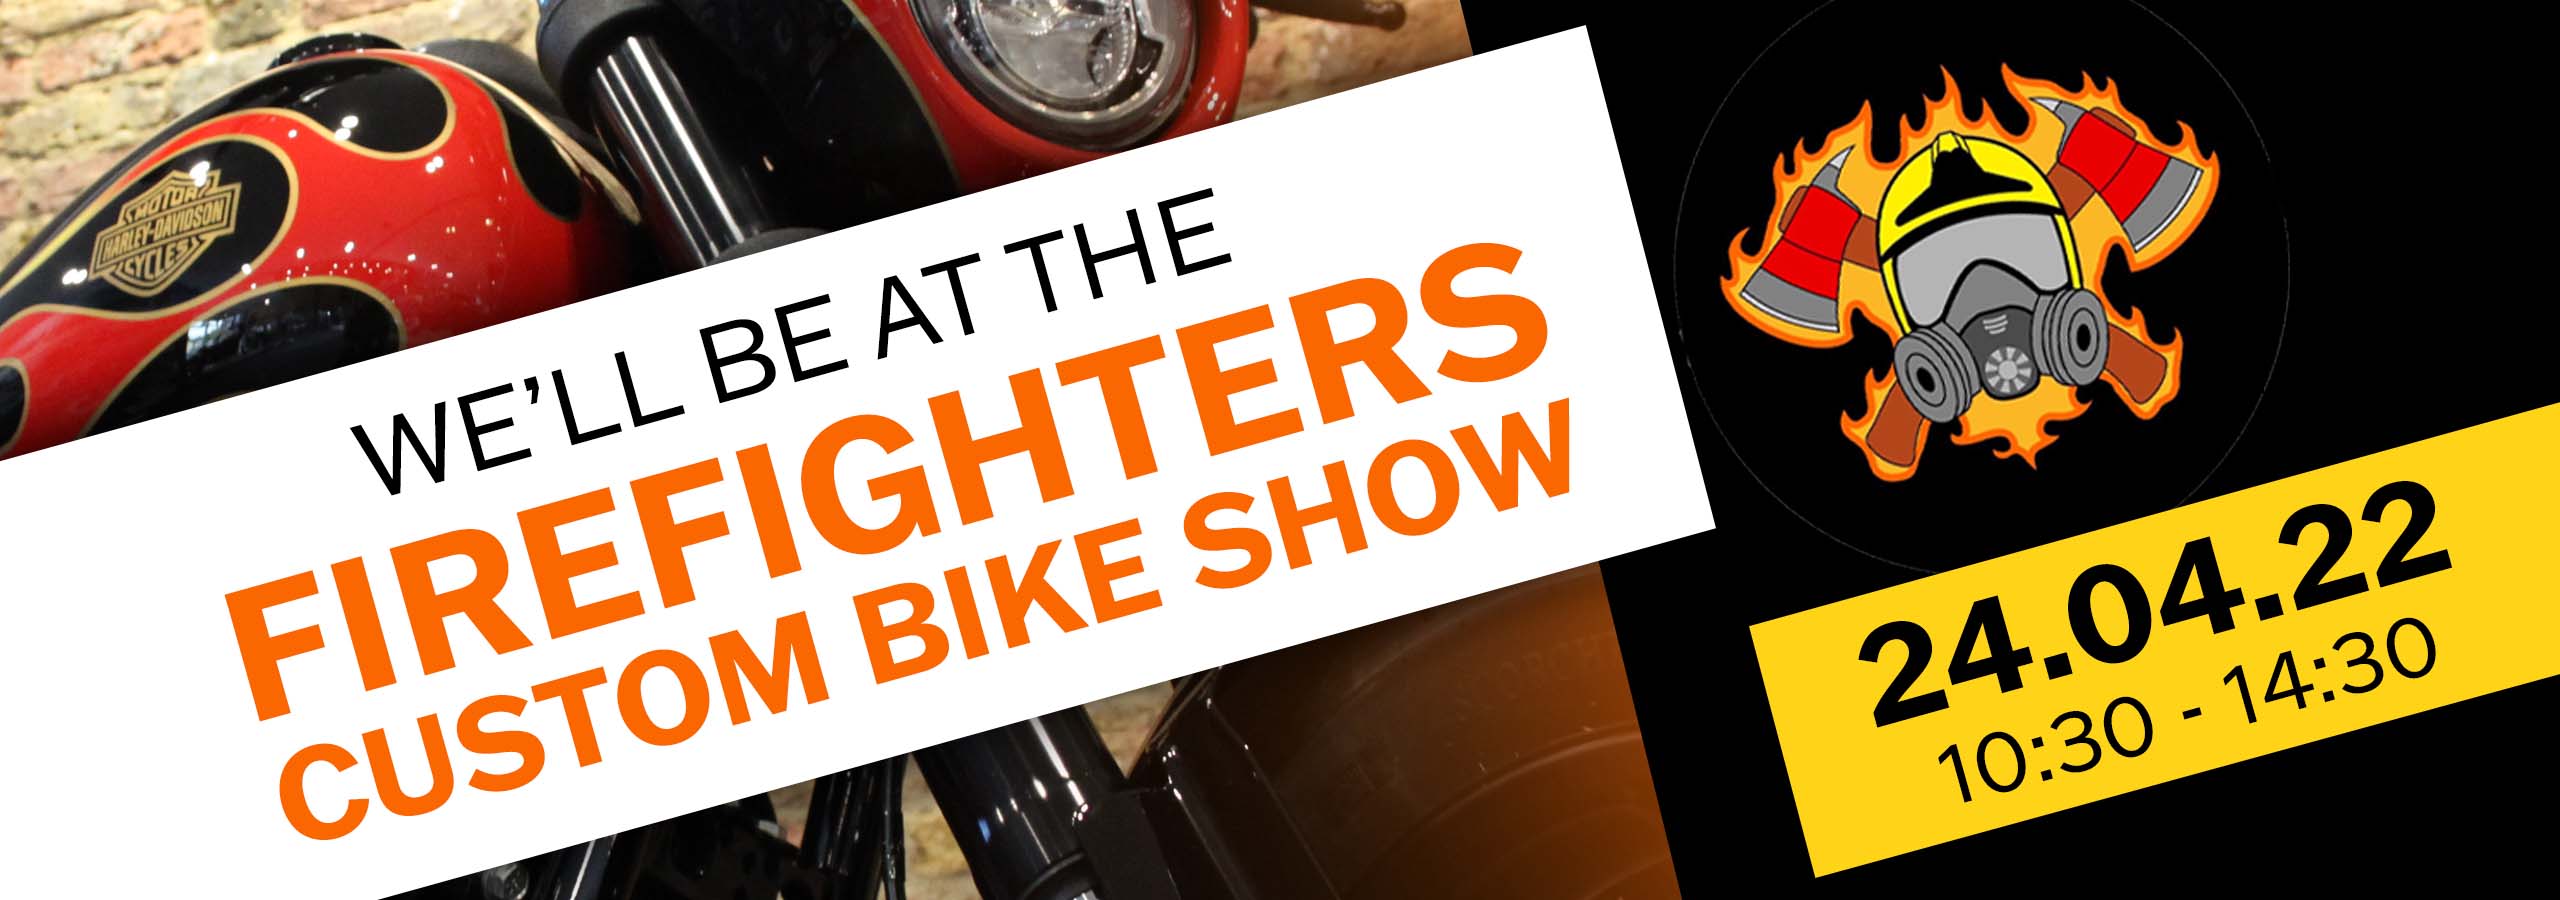 Rochester Firefighters Custom Motorcycle Show